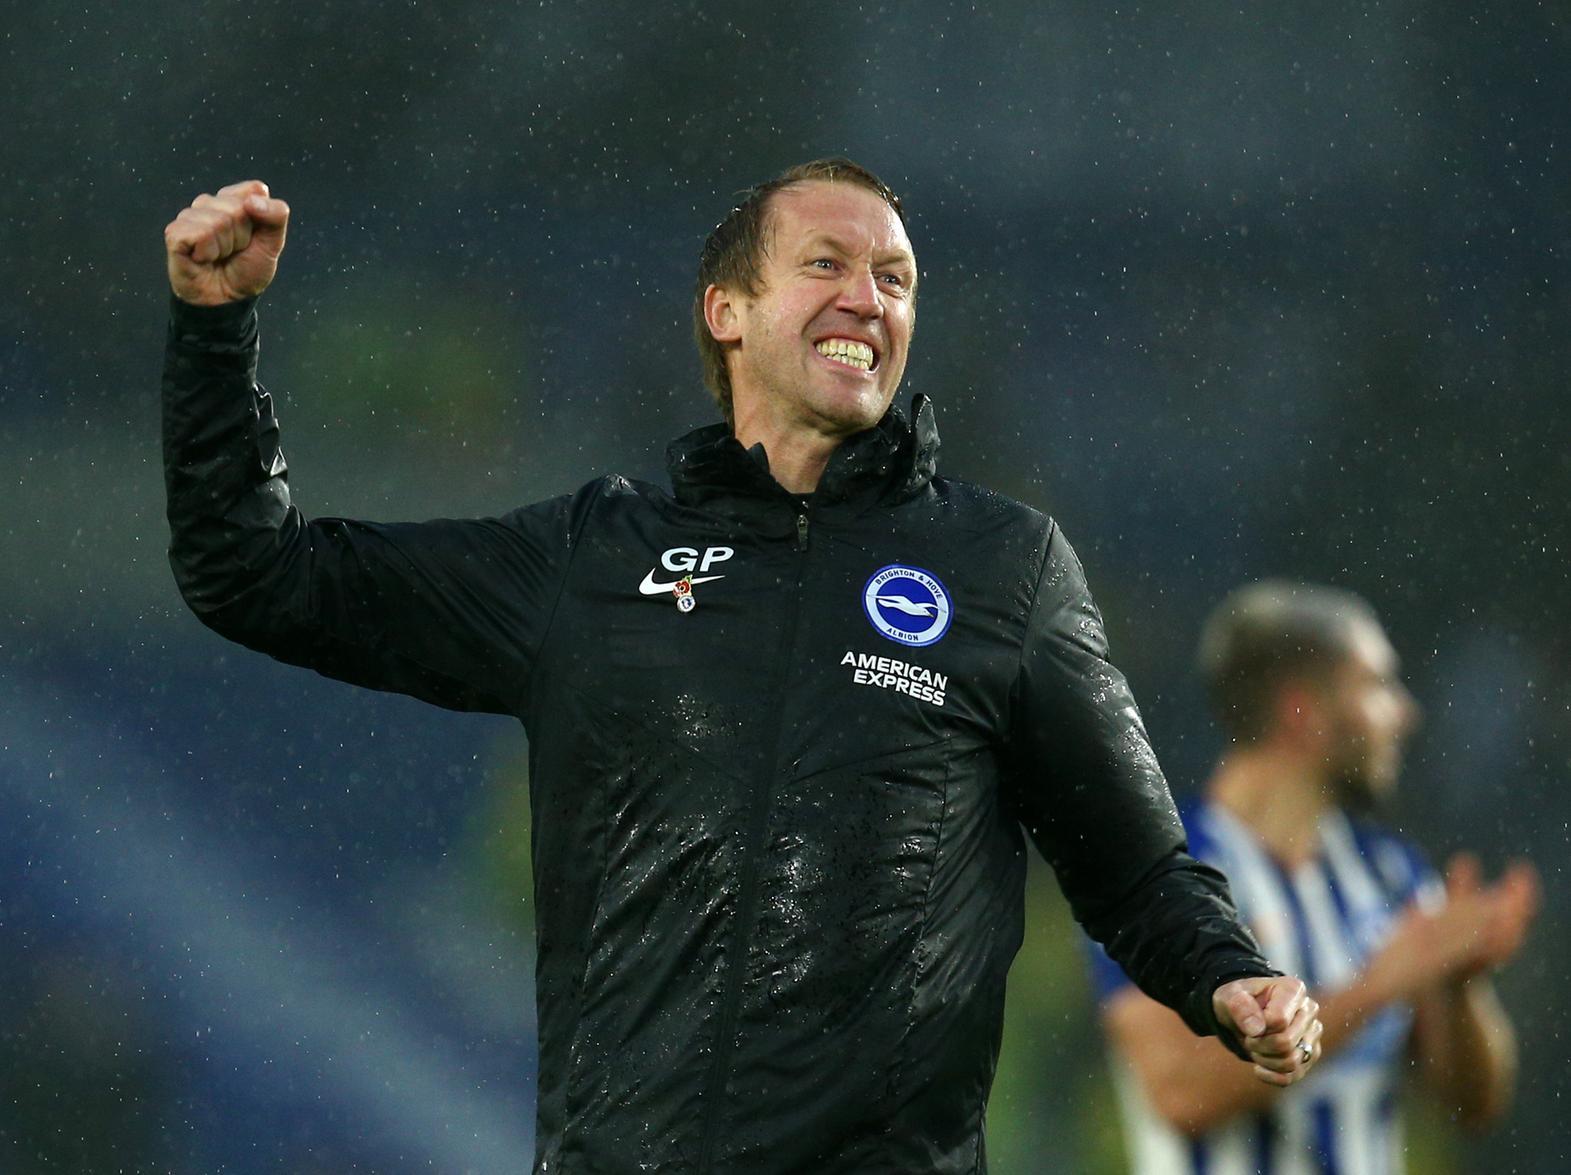 Brighton's head honcho is quietly going about his business at the Amex Stadium. The Seagulls have lost just one game in six at home to date and thrashed Spurs last month.